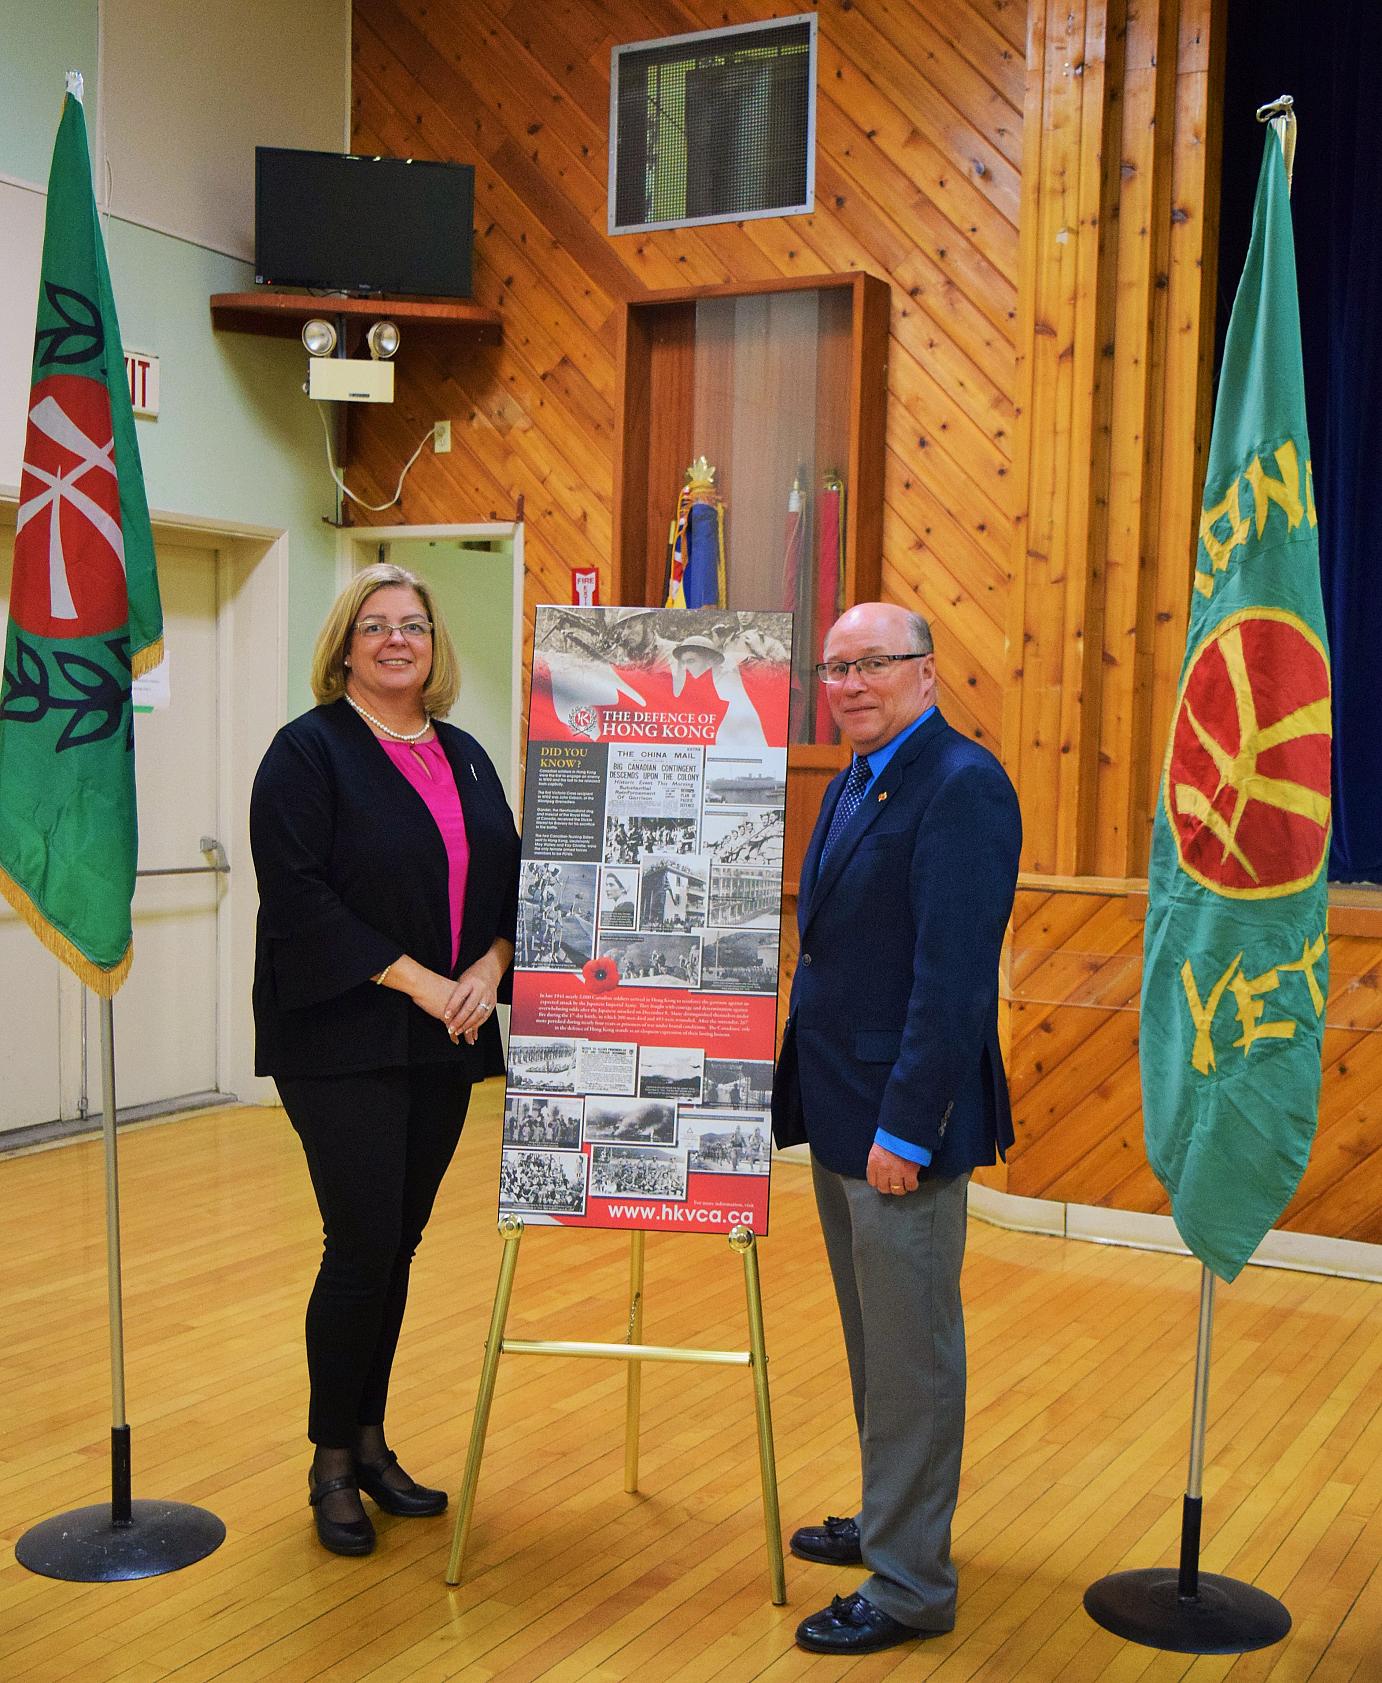 Estevan area MLA Lori Carr on left and MP Dr. Robert Kitchen on right. - both spoke at the Estevan plaque unveiling